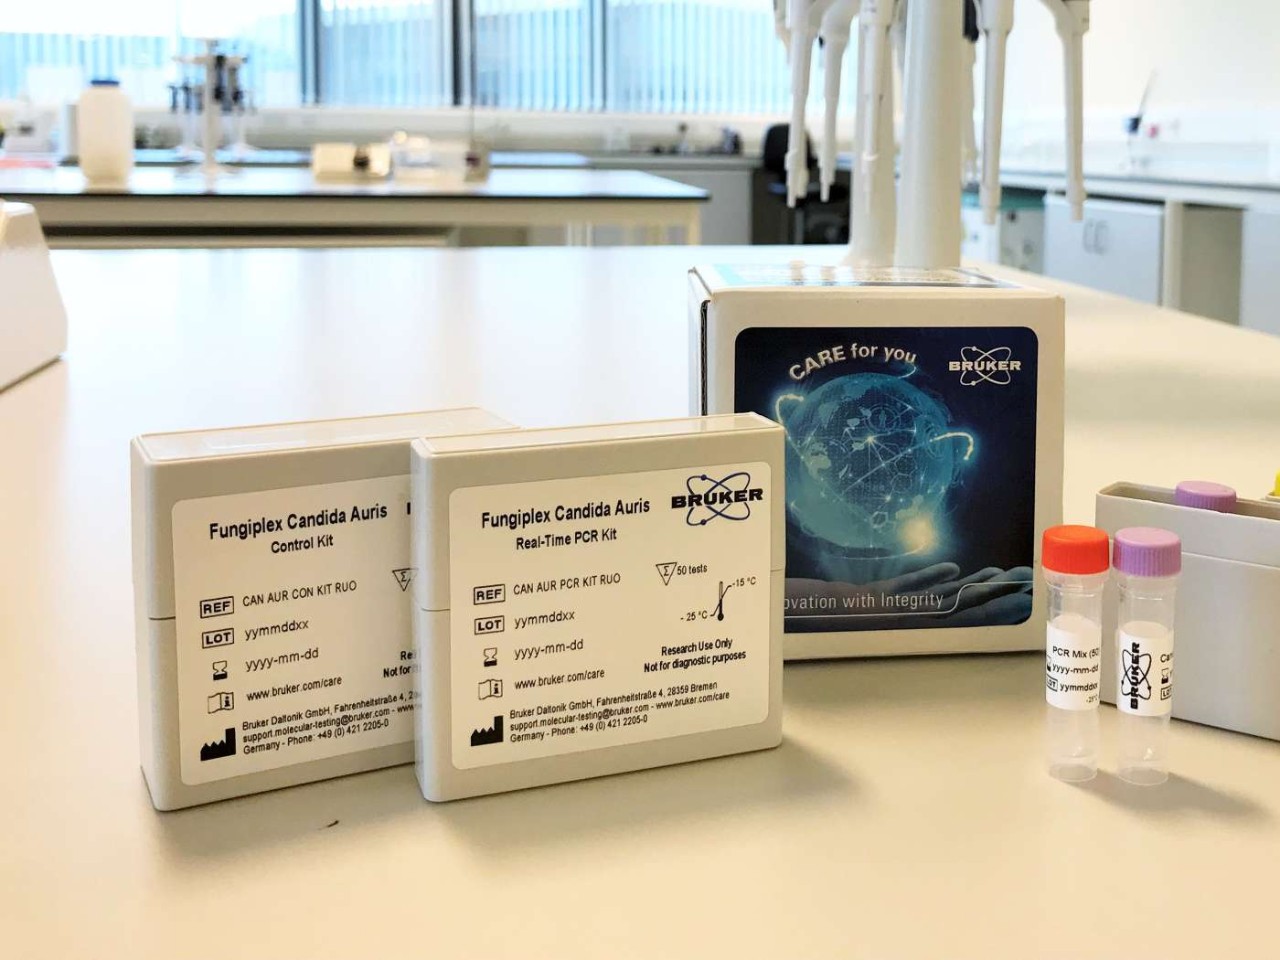 Fungiplex Candida Auris RUO Real-Time PCR Kit